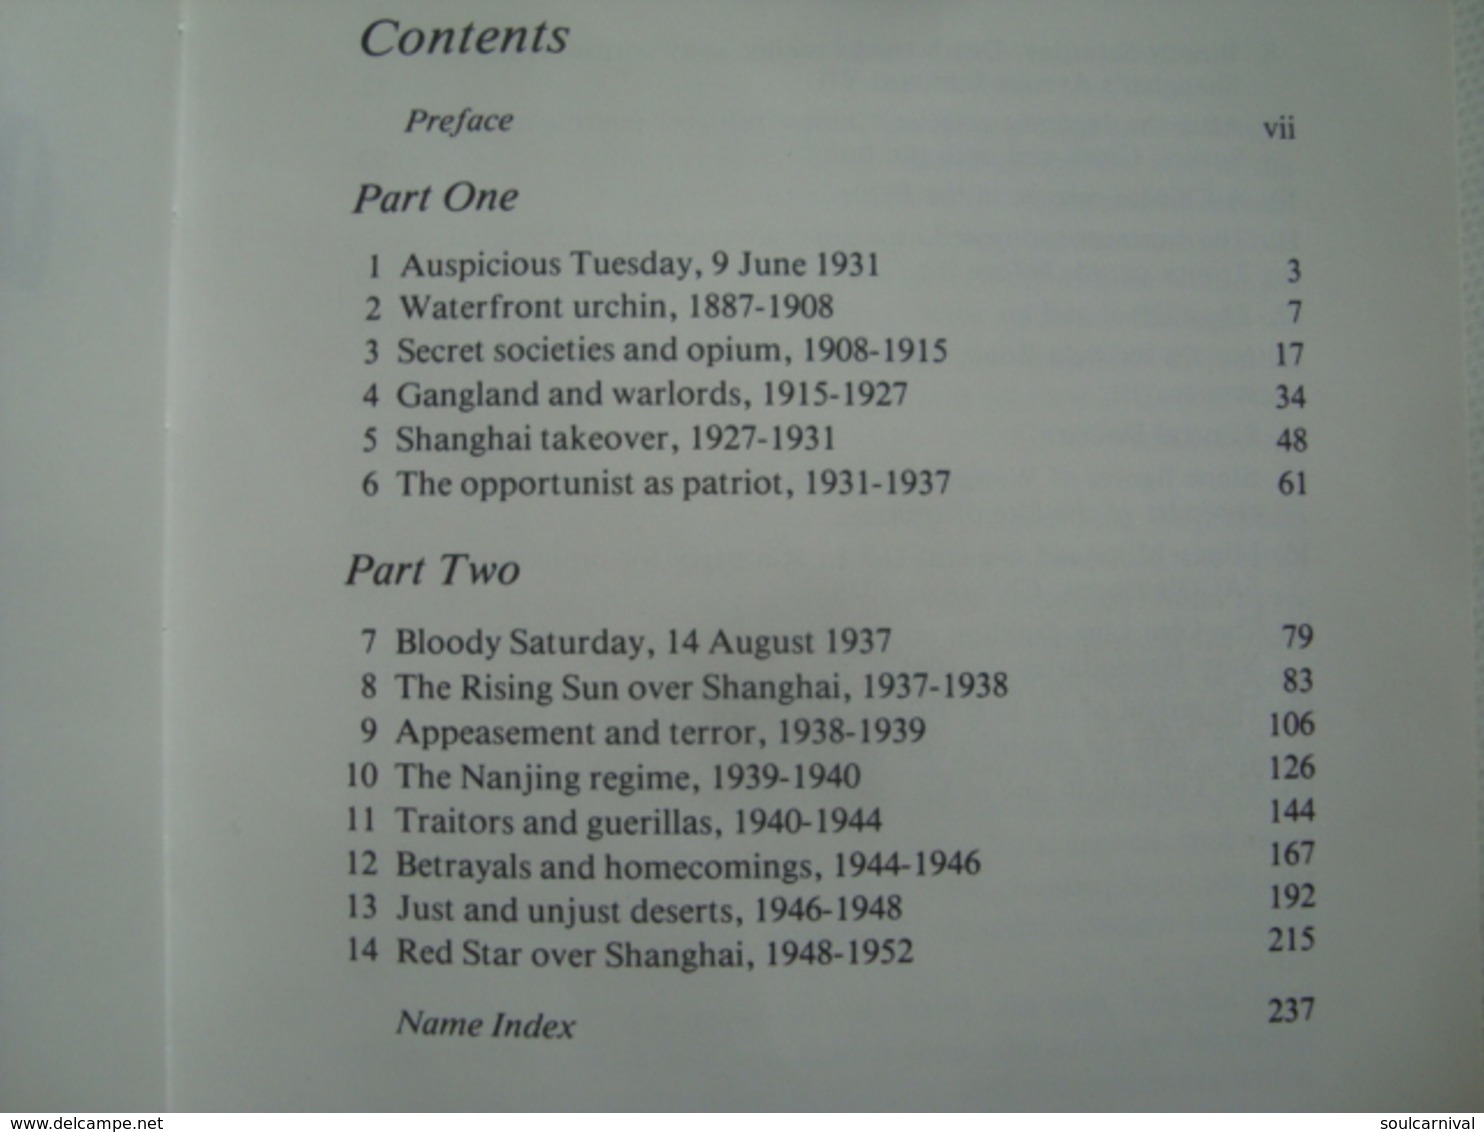 PAN LING - OLD SHANGHAI. GANGSTERS IN PARADISE - CHINA, HEINEMANN ASIA, 1984. - Asia